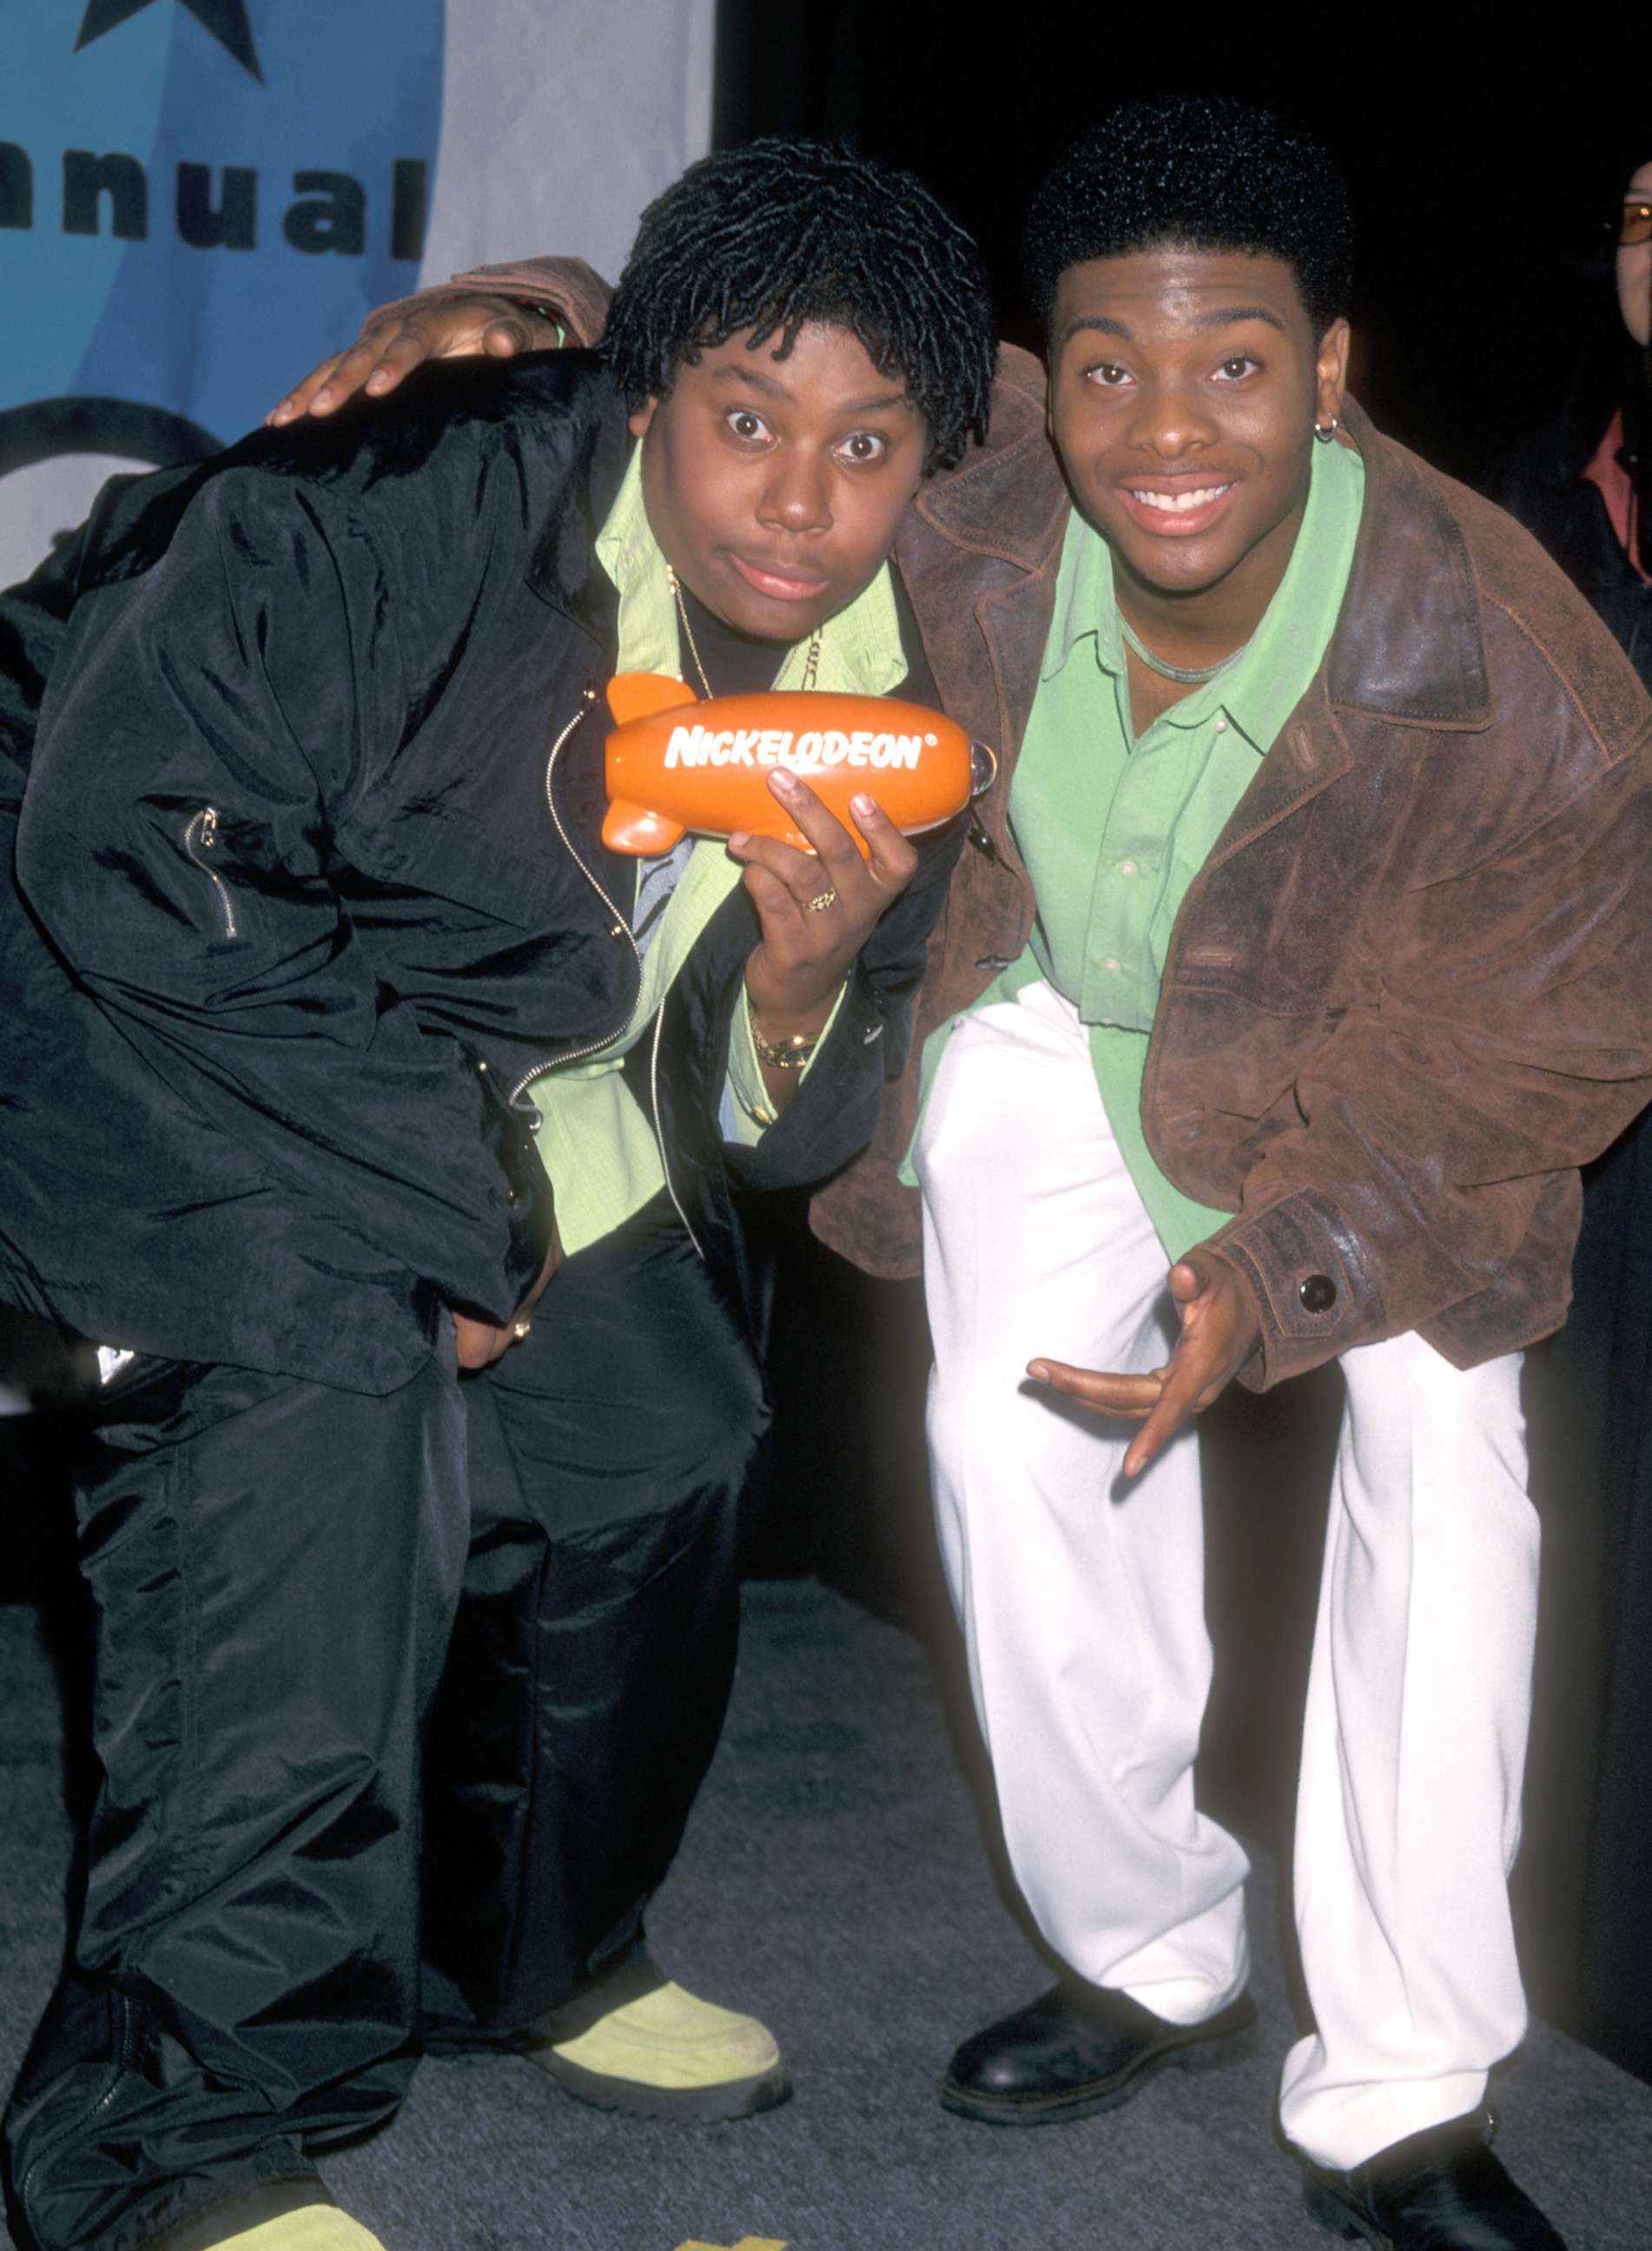 PHOTO: Kenan Thompson and Kel Mitchell attend the 11th Annual Nickelodeon's Kids' Choice Awards, April 4, 1998, in Westwood, Calif.